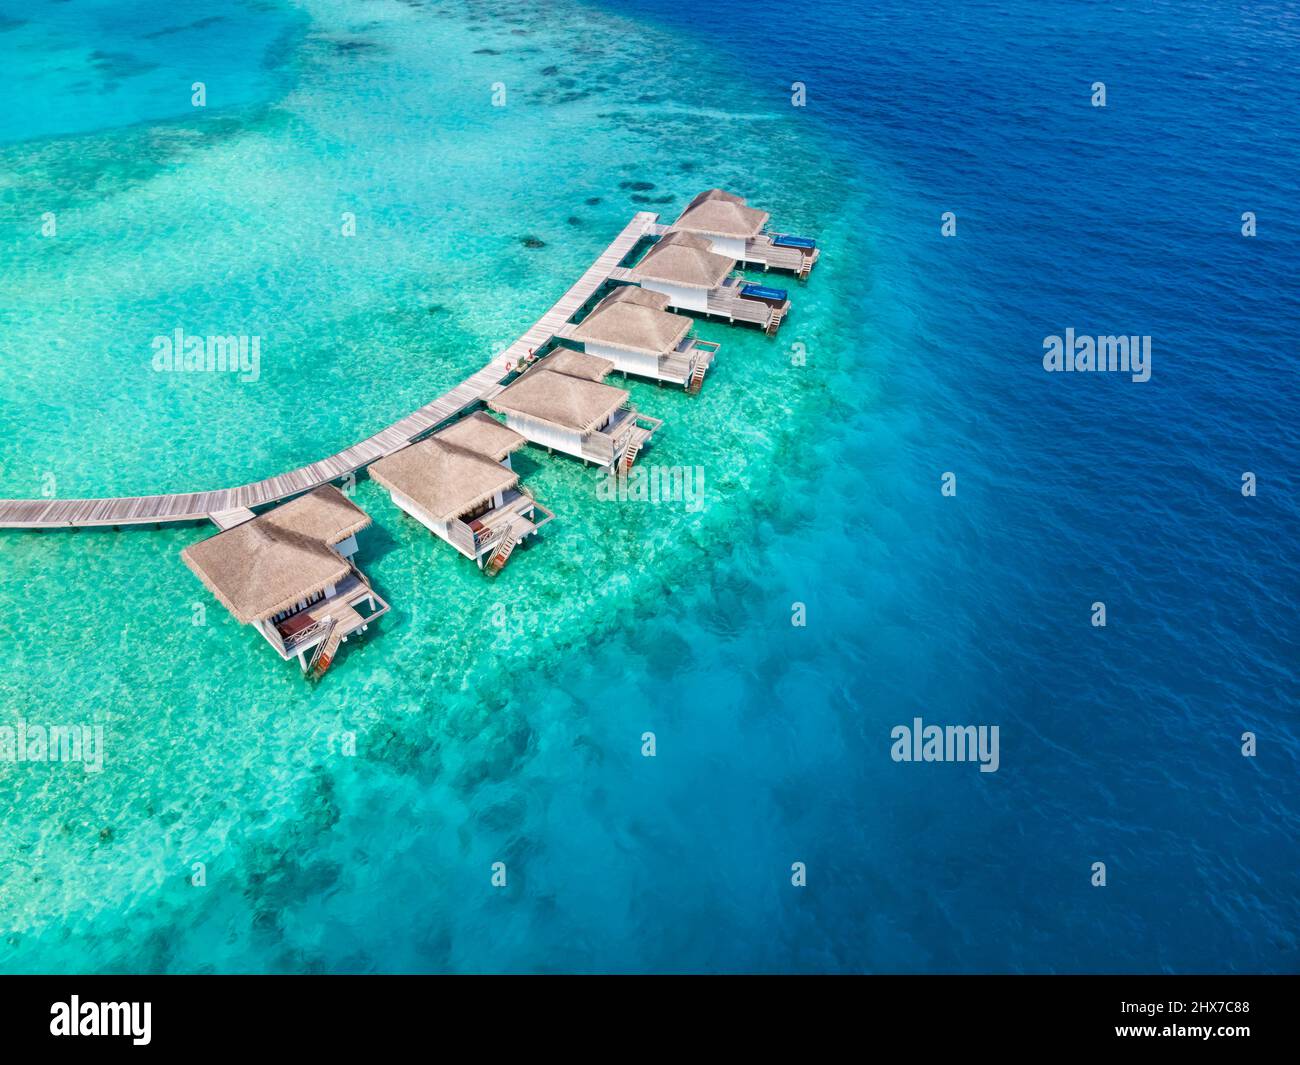 Overwater villas on tropical atoll island for holidays vacation travel and honeymoon. Luxury resort hotel in Maldives or Caribbean with turquoise sea Stock Photo